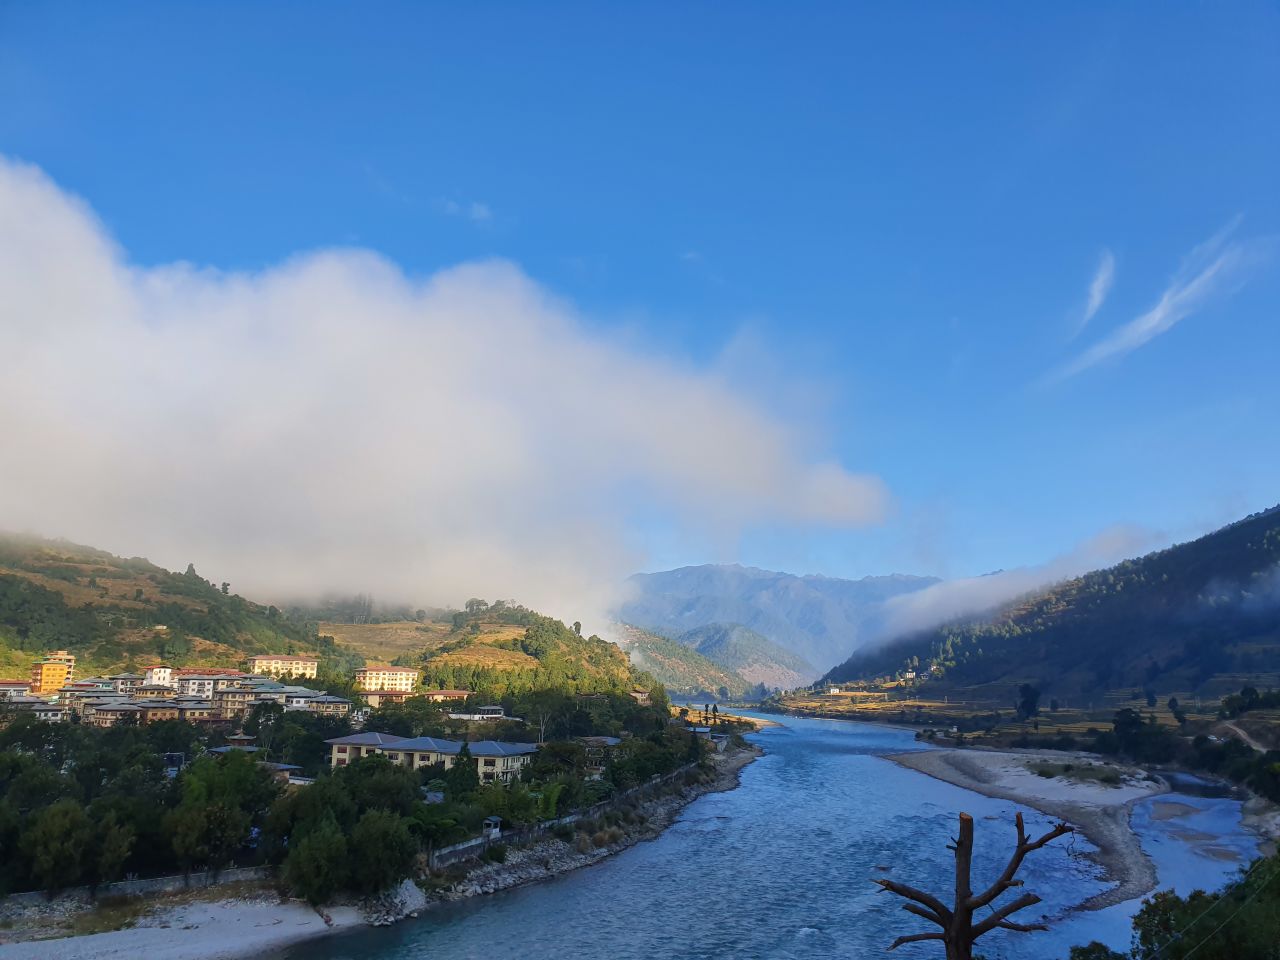 <strong>Connecting the country:</strong> The trail's westernmost point is the town of Haa, which is near the border with Tibet. The easternmost point is Trashigang, near the border of India's Arunachal Pradesh state.